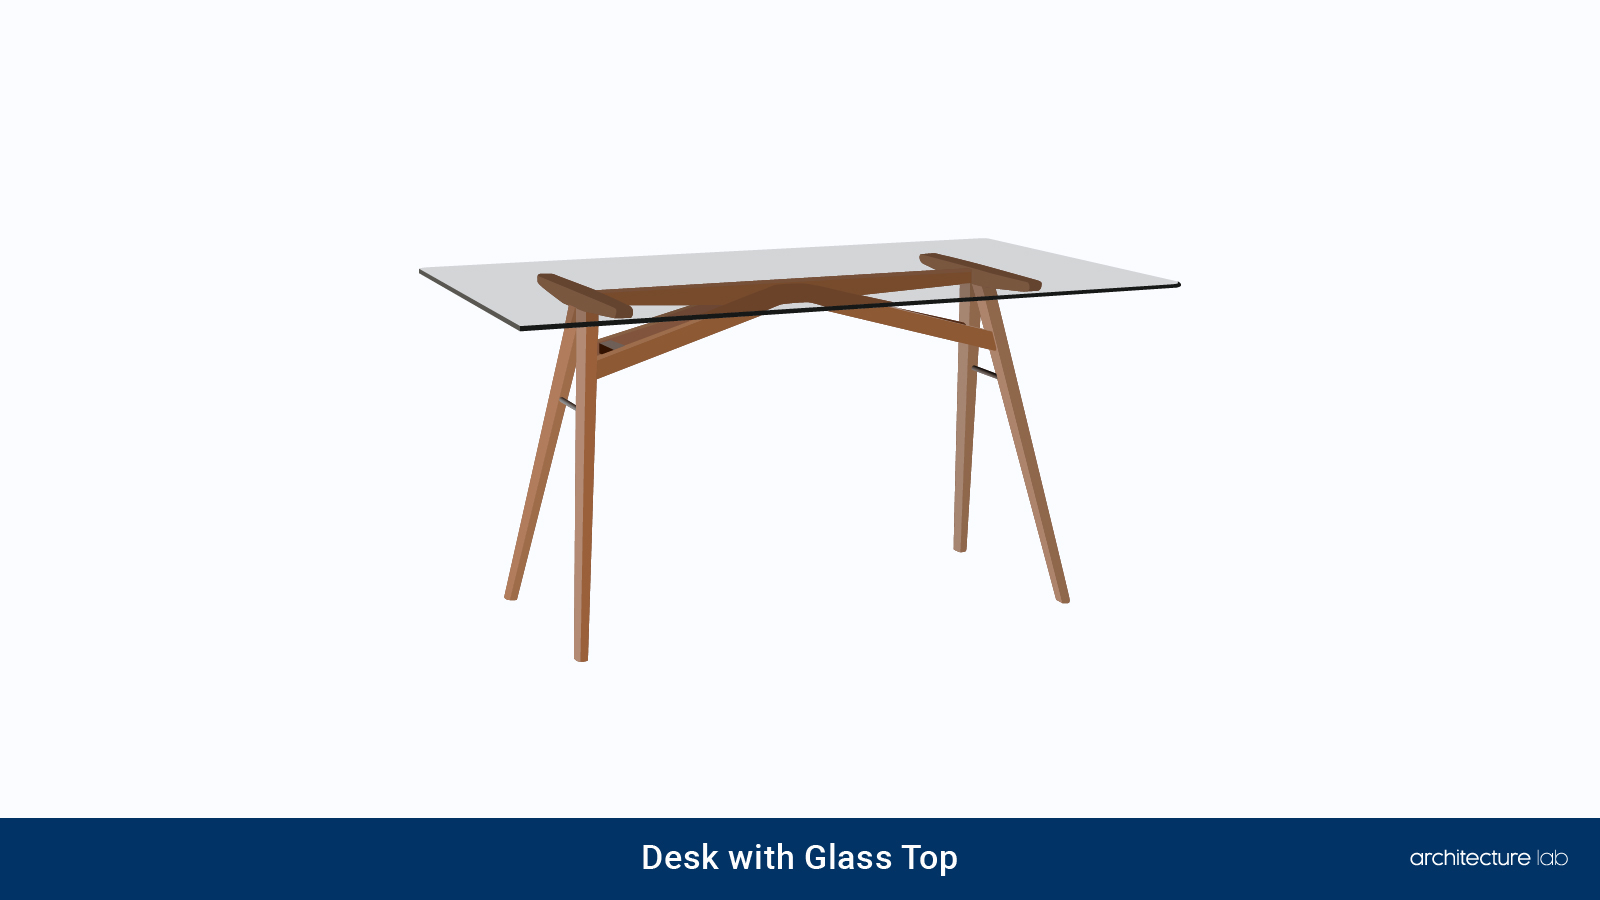 26. Desk with glass top